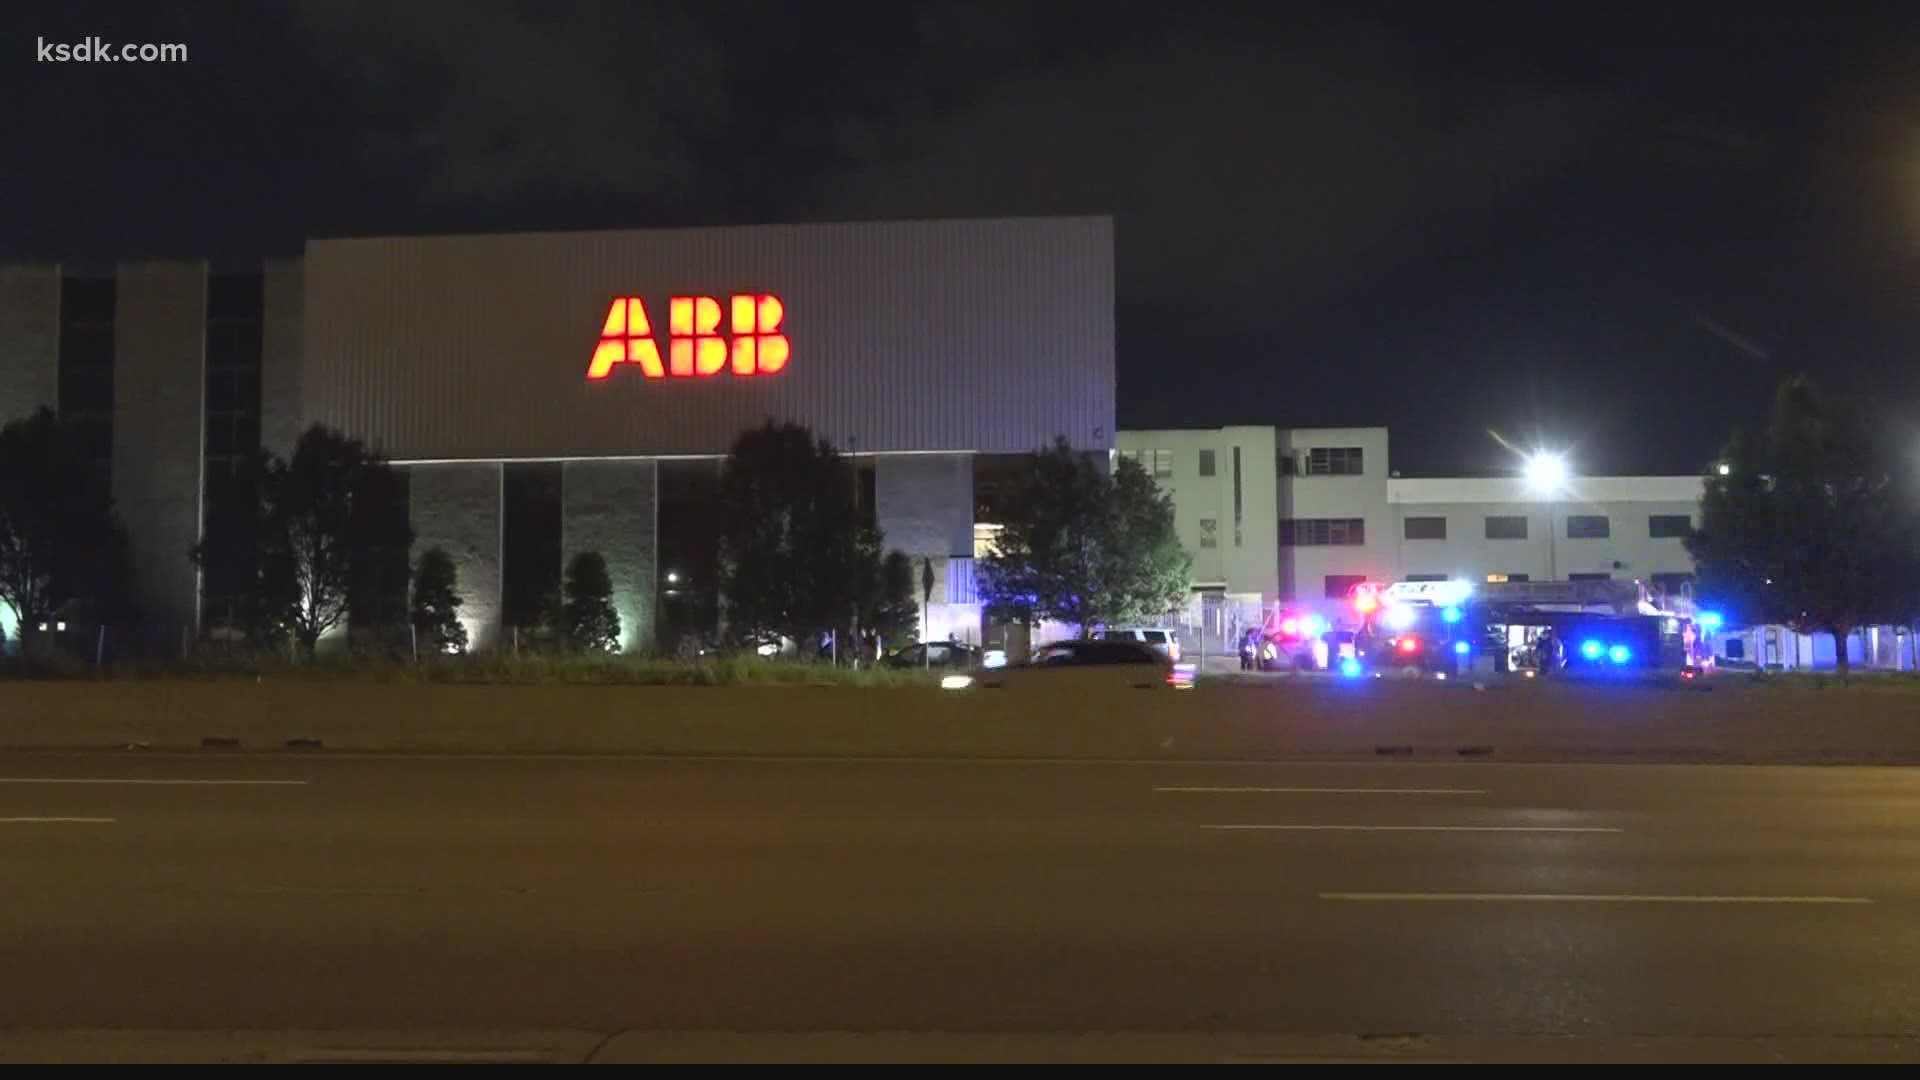 Police were investigating a car outside of the former ABB manufacturing plant